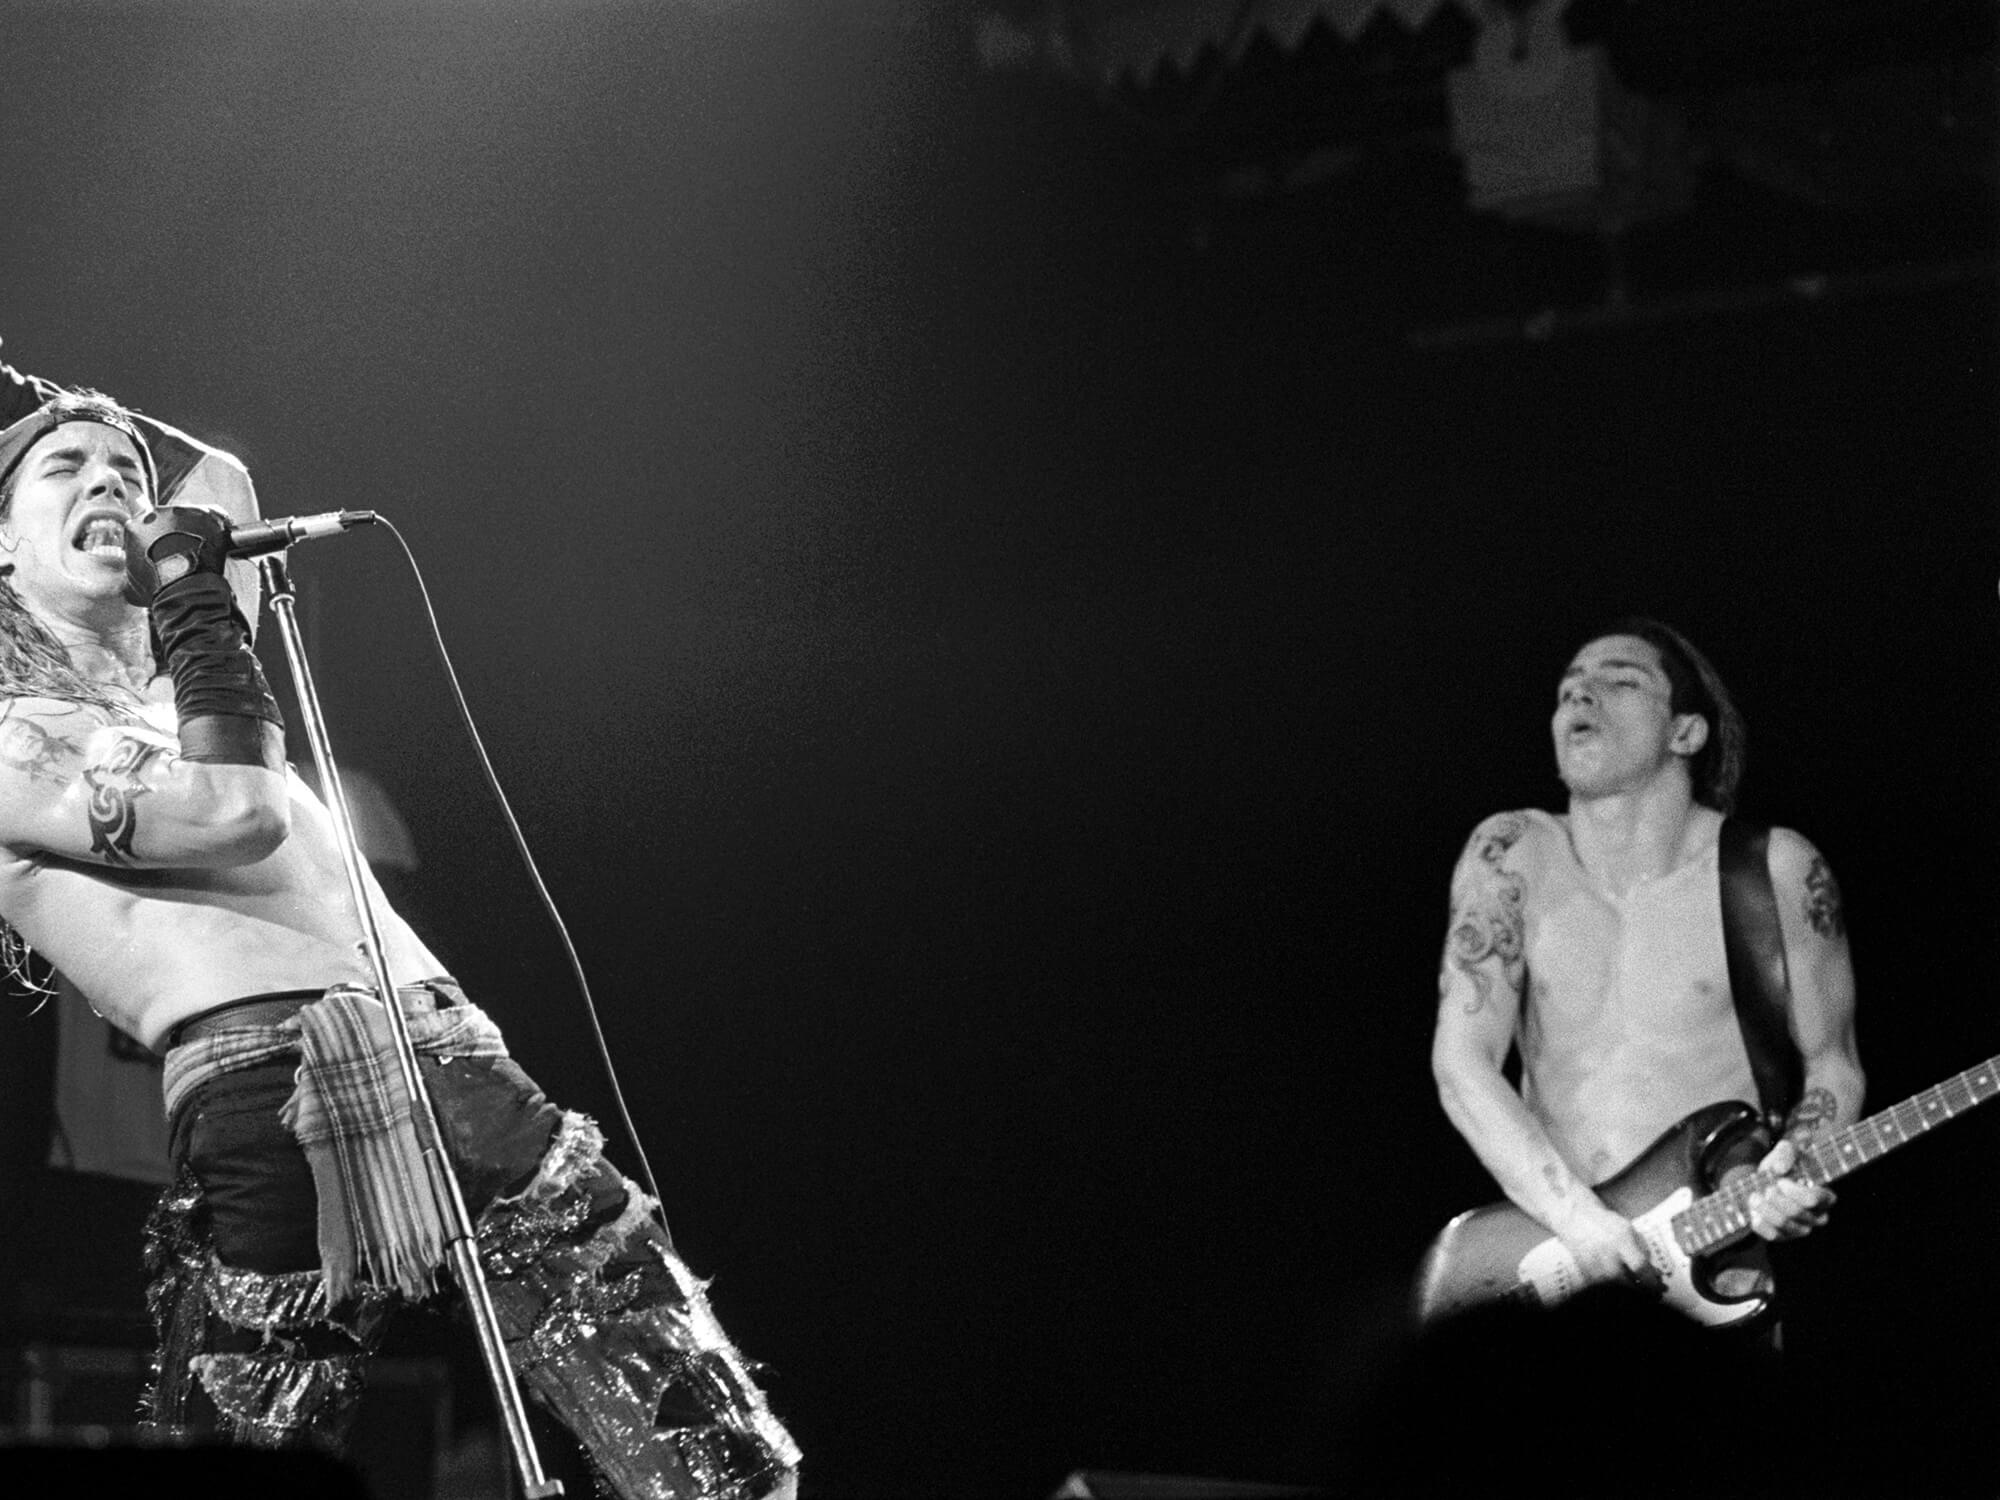 Red Hot Chili Peppers Anthony Kiedis John Frusciante on stage in 1990. Photo by Frans Schellekens/Redferns